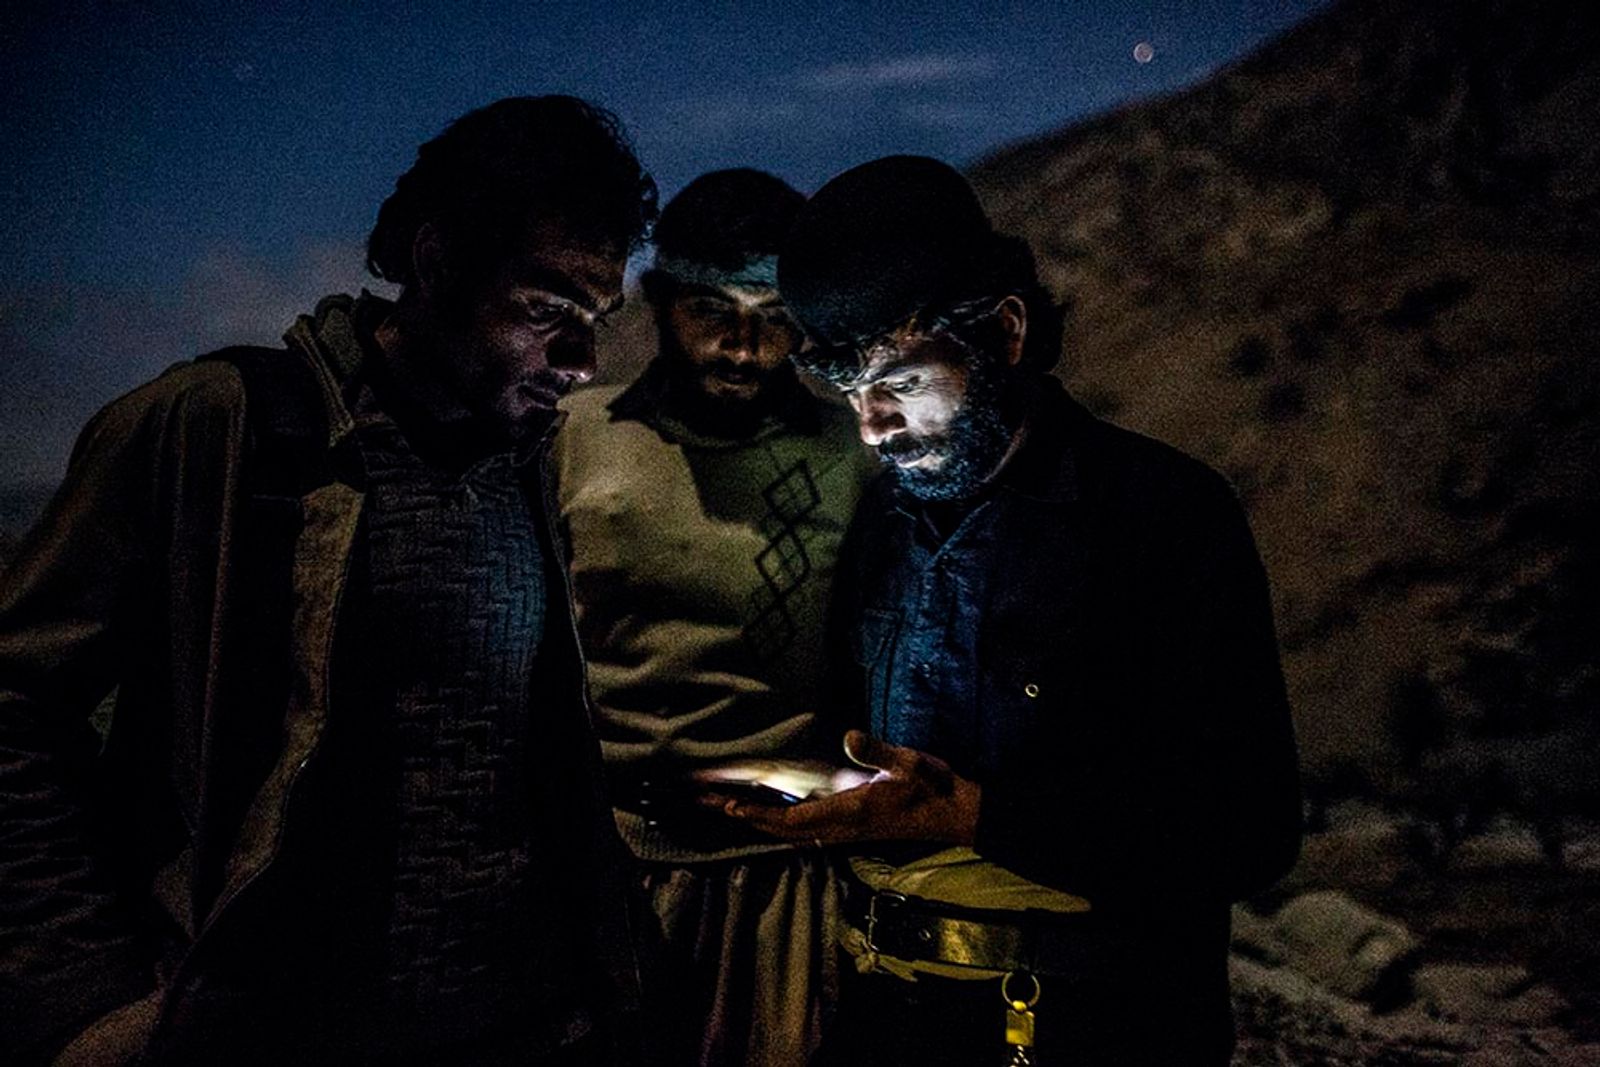 © Catalina Martin-chico - Image from the The Last and The Lost — The Brave Nomads of Iran photography project